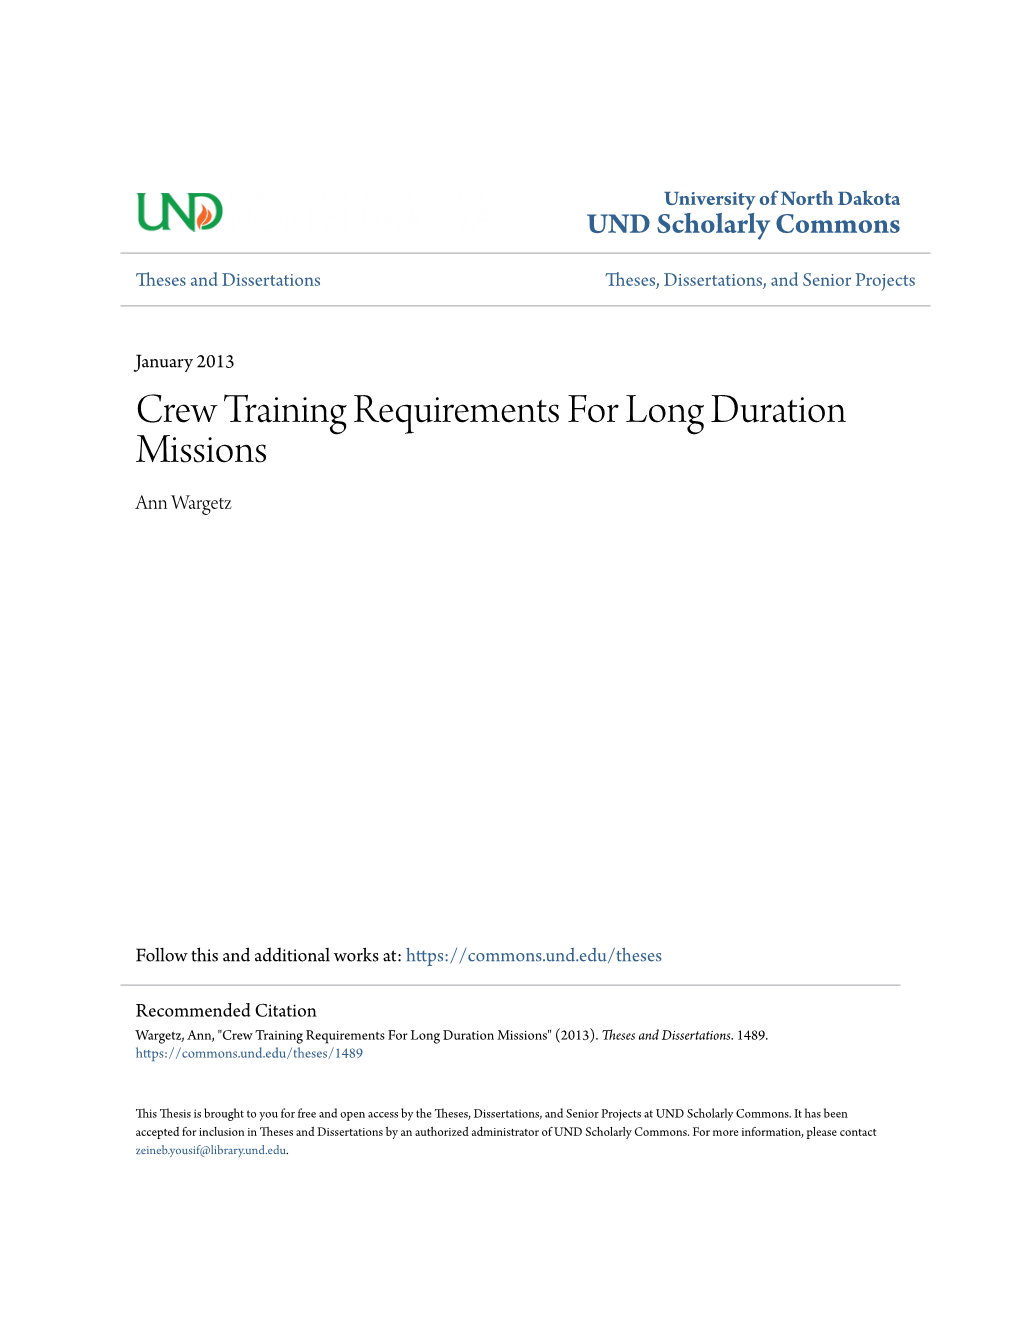 Crew Training Requirements for Long Duration Missions Ann Wargetz